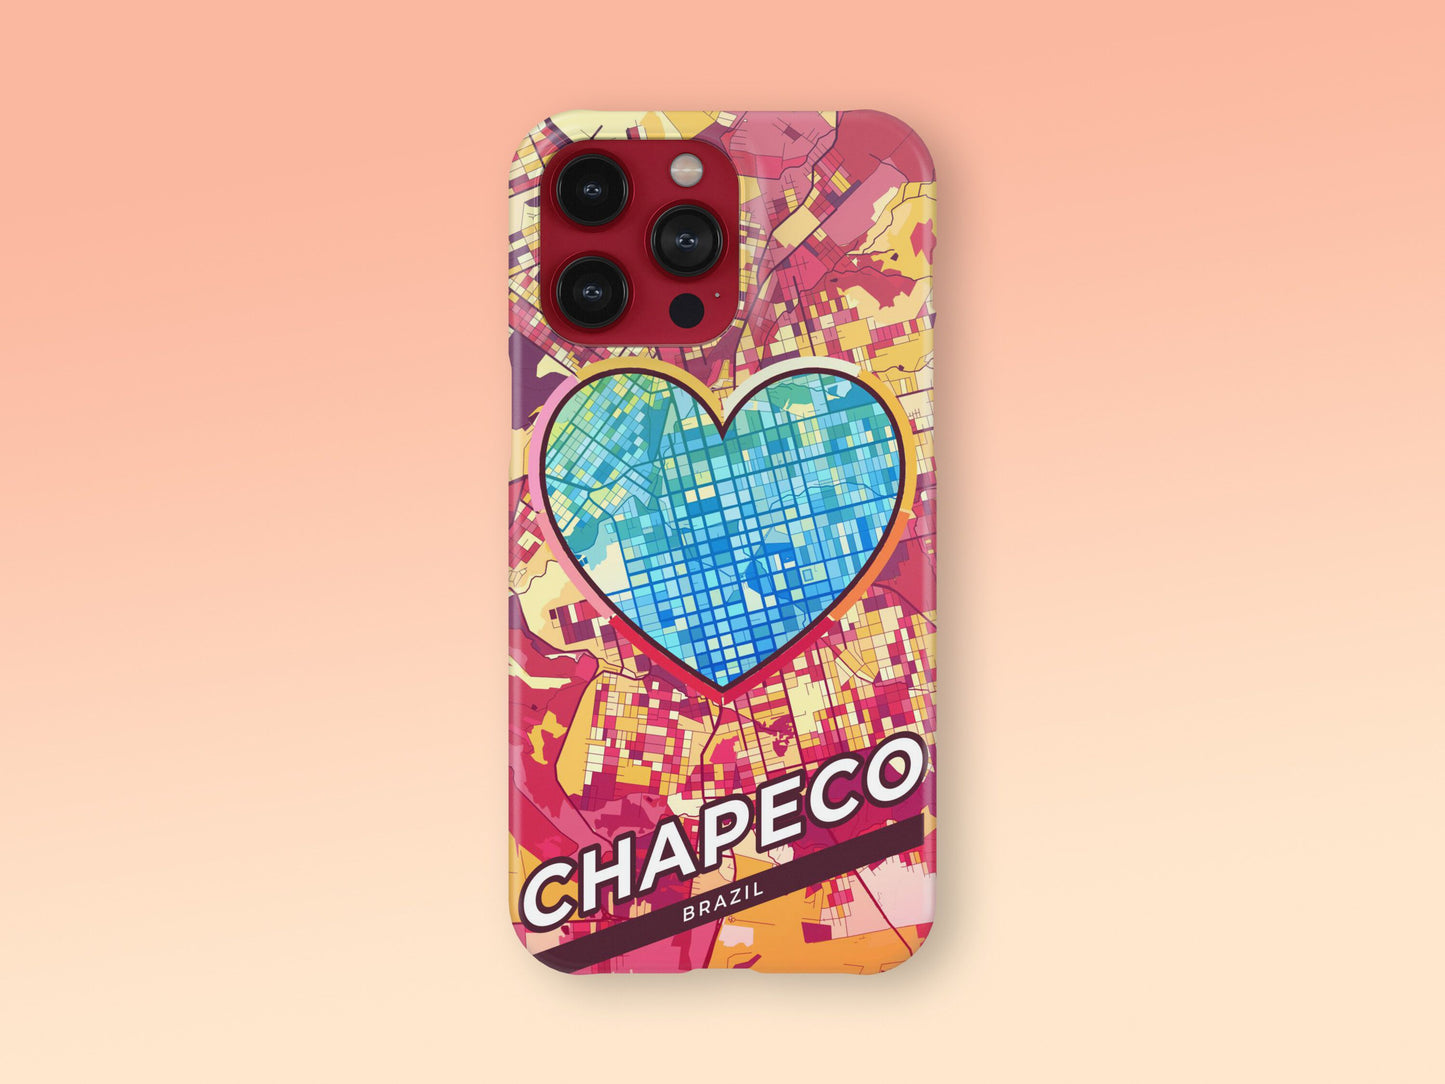 Chapeco Brazil slim phone case with colorful icon. Birthday, wedding or housewarming gift. Couple match cases. 2